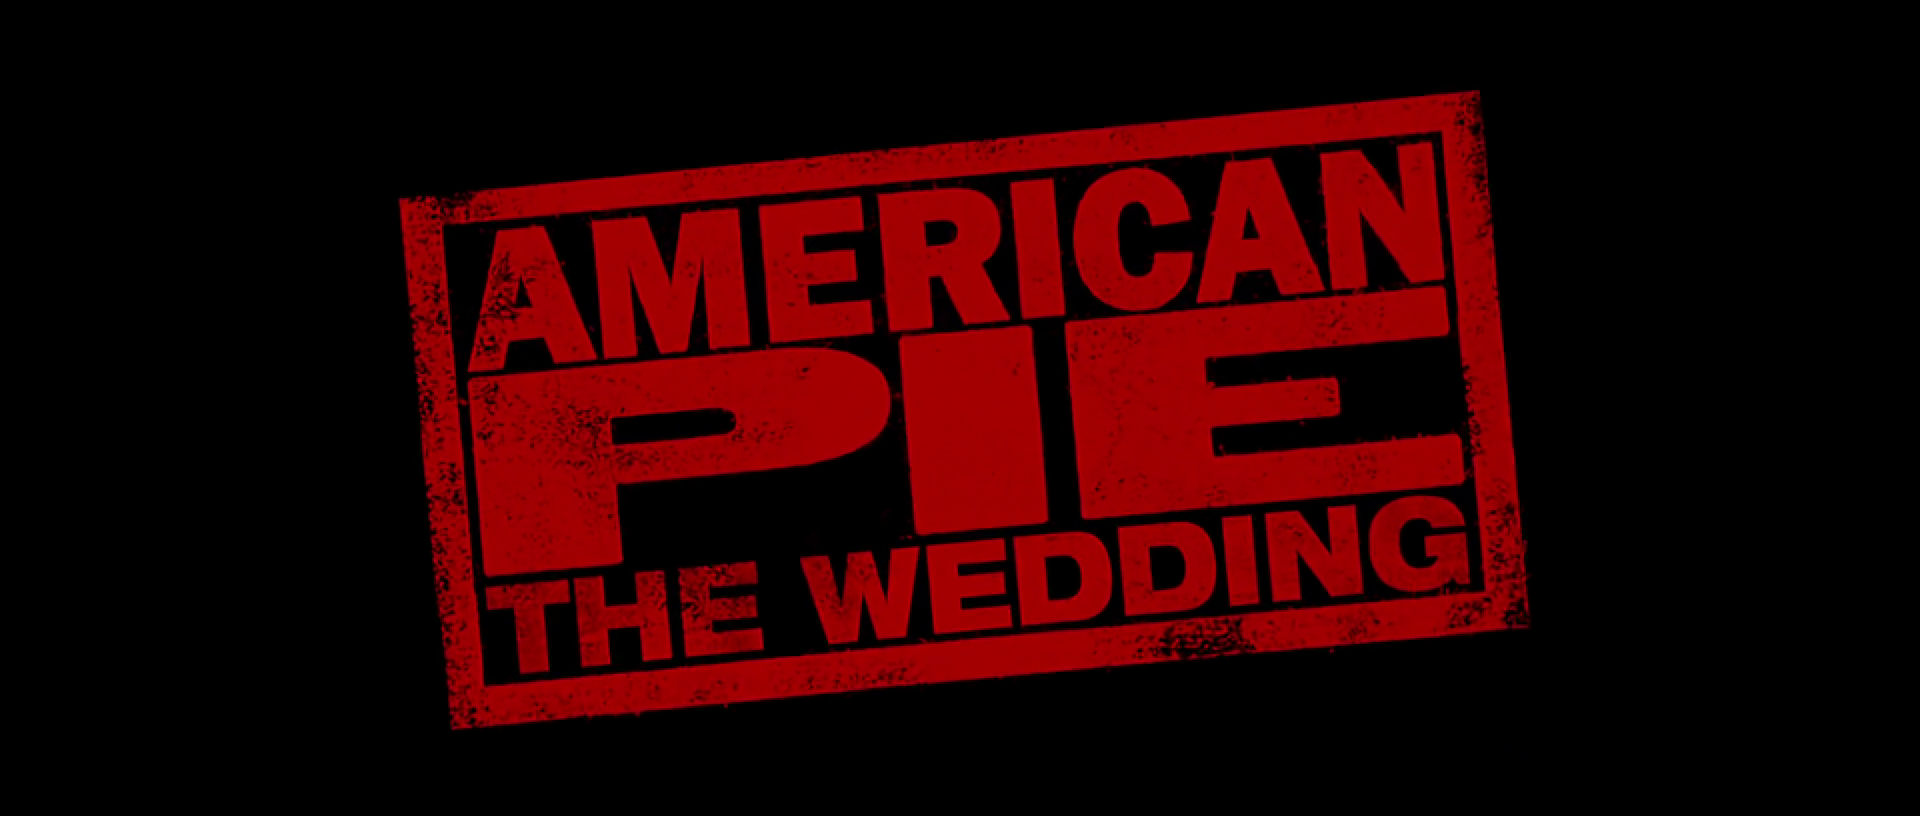 RELEASE DATE: July 24, 2003. MOVIE TITLE: American Wedding. STUDIO:  Universal Studios. PLOT: The third film in the American Pie series deals  with the wedding of Jim and Michelle and the gathering